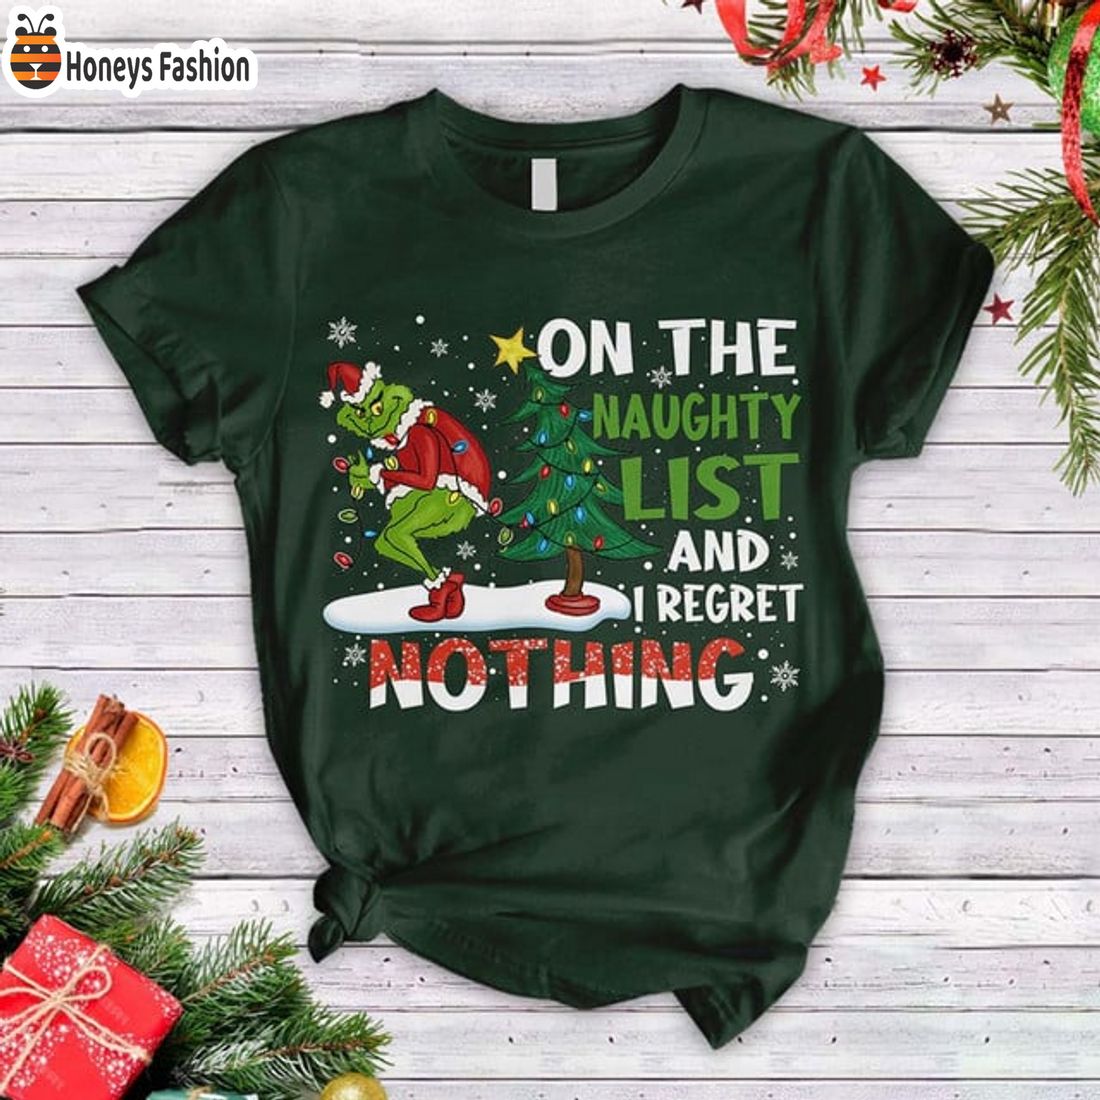 TRENDING The Grinch On The Naughty List A I Regret Nothing Christmas Pajamas Set